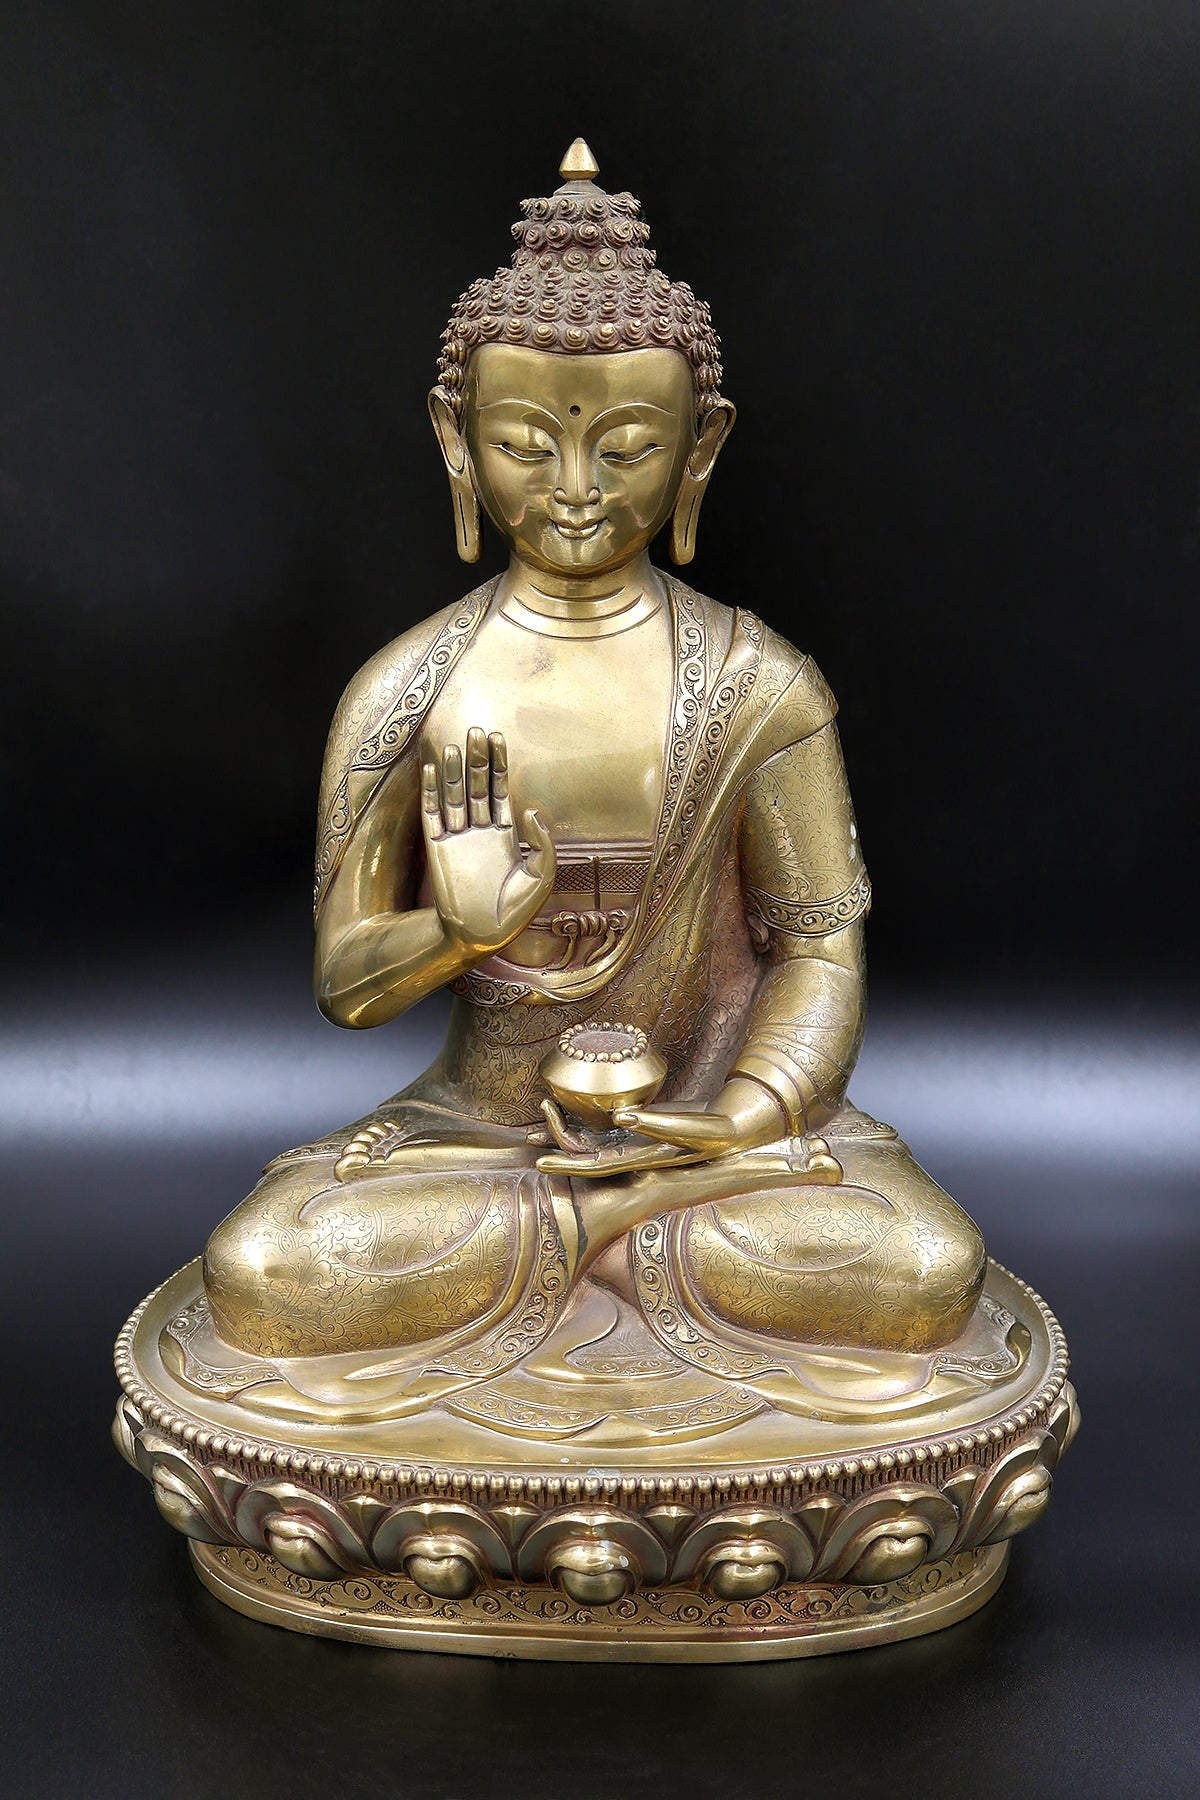 Lord Blessing Buddha Idol Sculpture, Buddhism Home Décor, Collectible Statue 13"